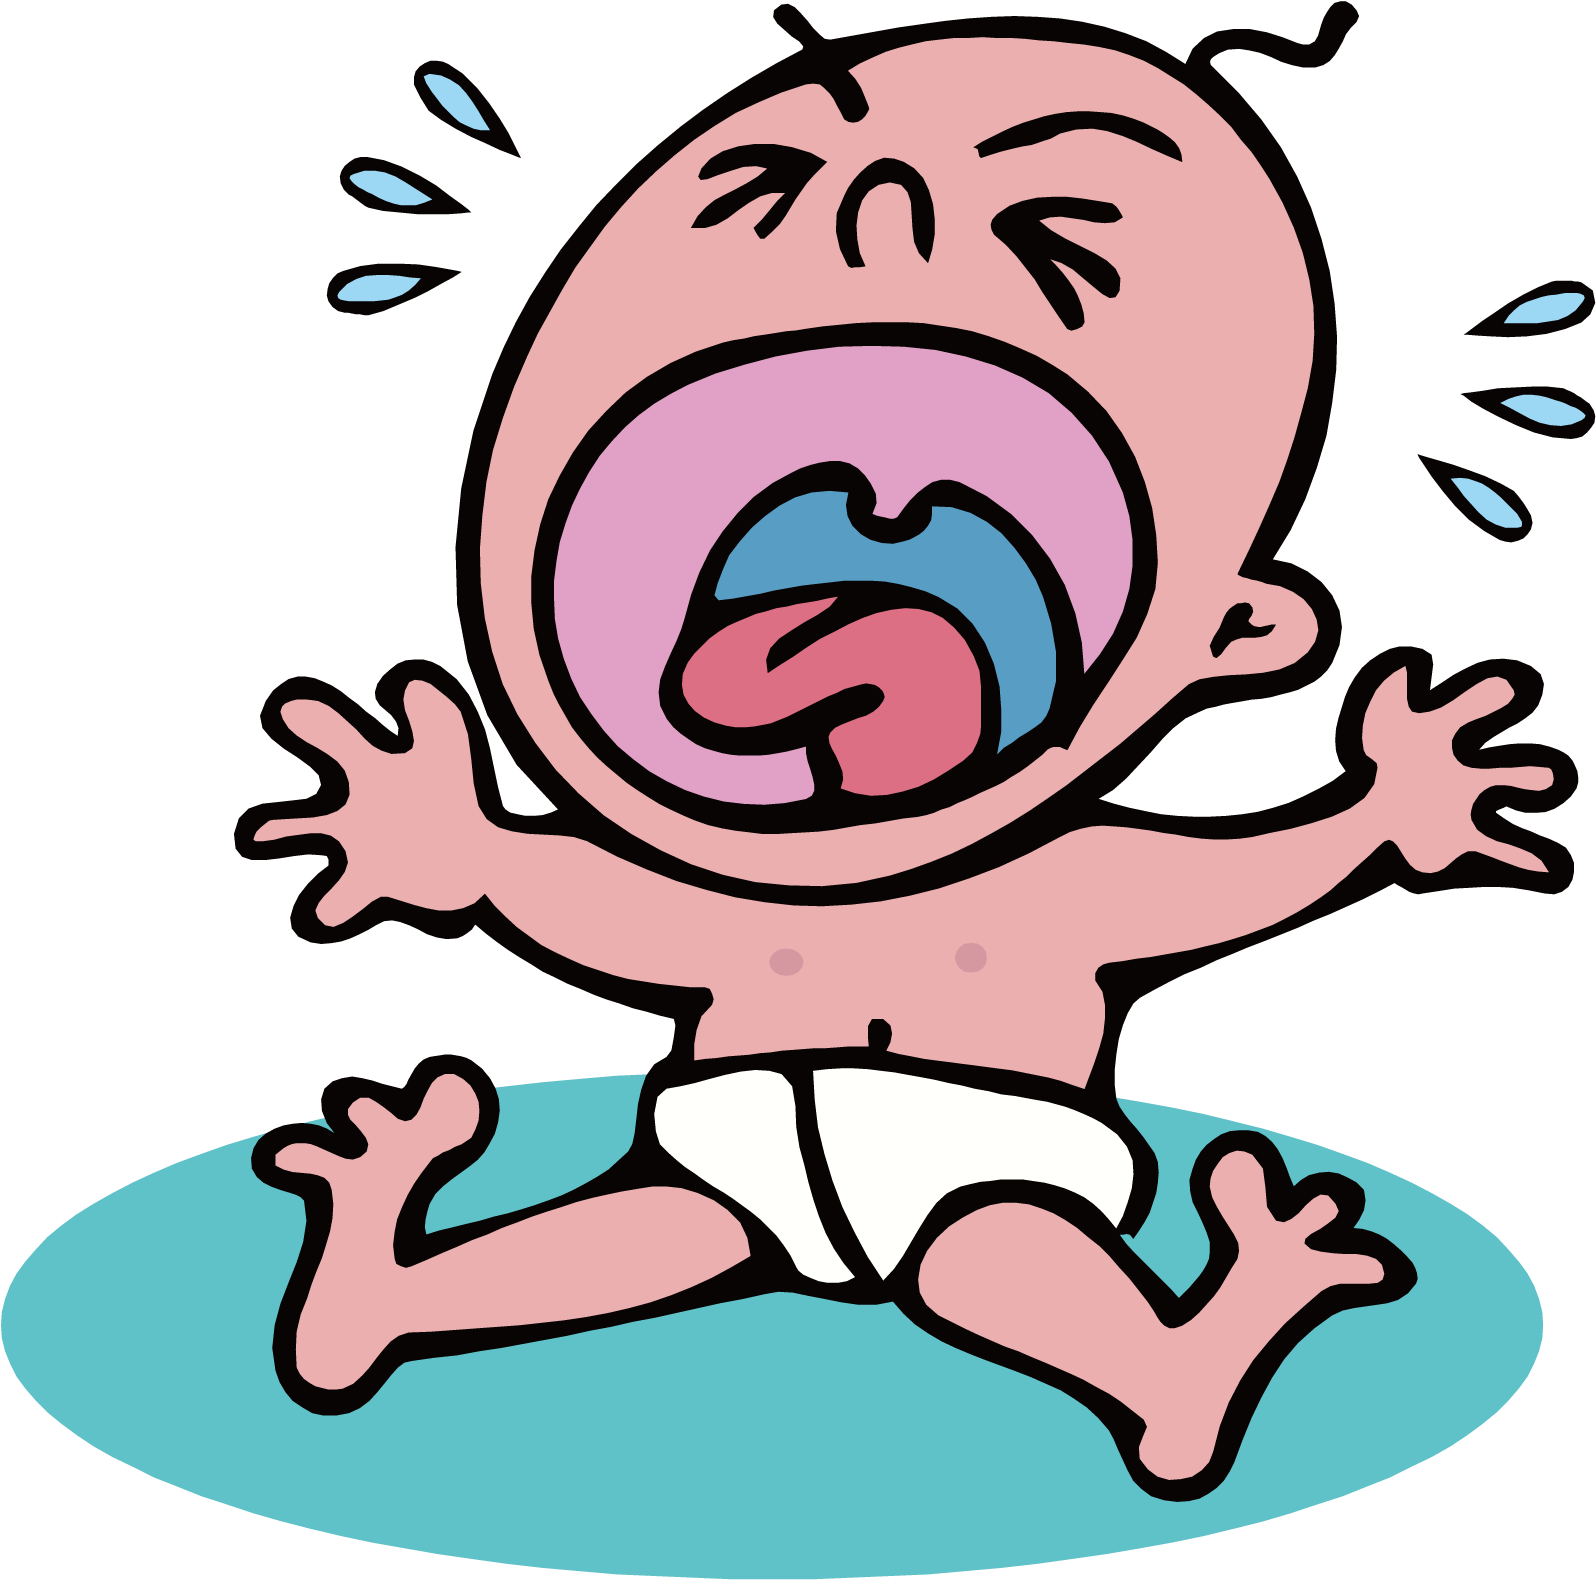 Crying Infant Cartoon Child Clip Art - Crying Infant Cartoon Child Clip Art.